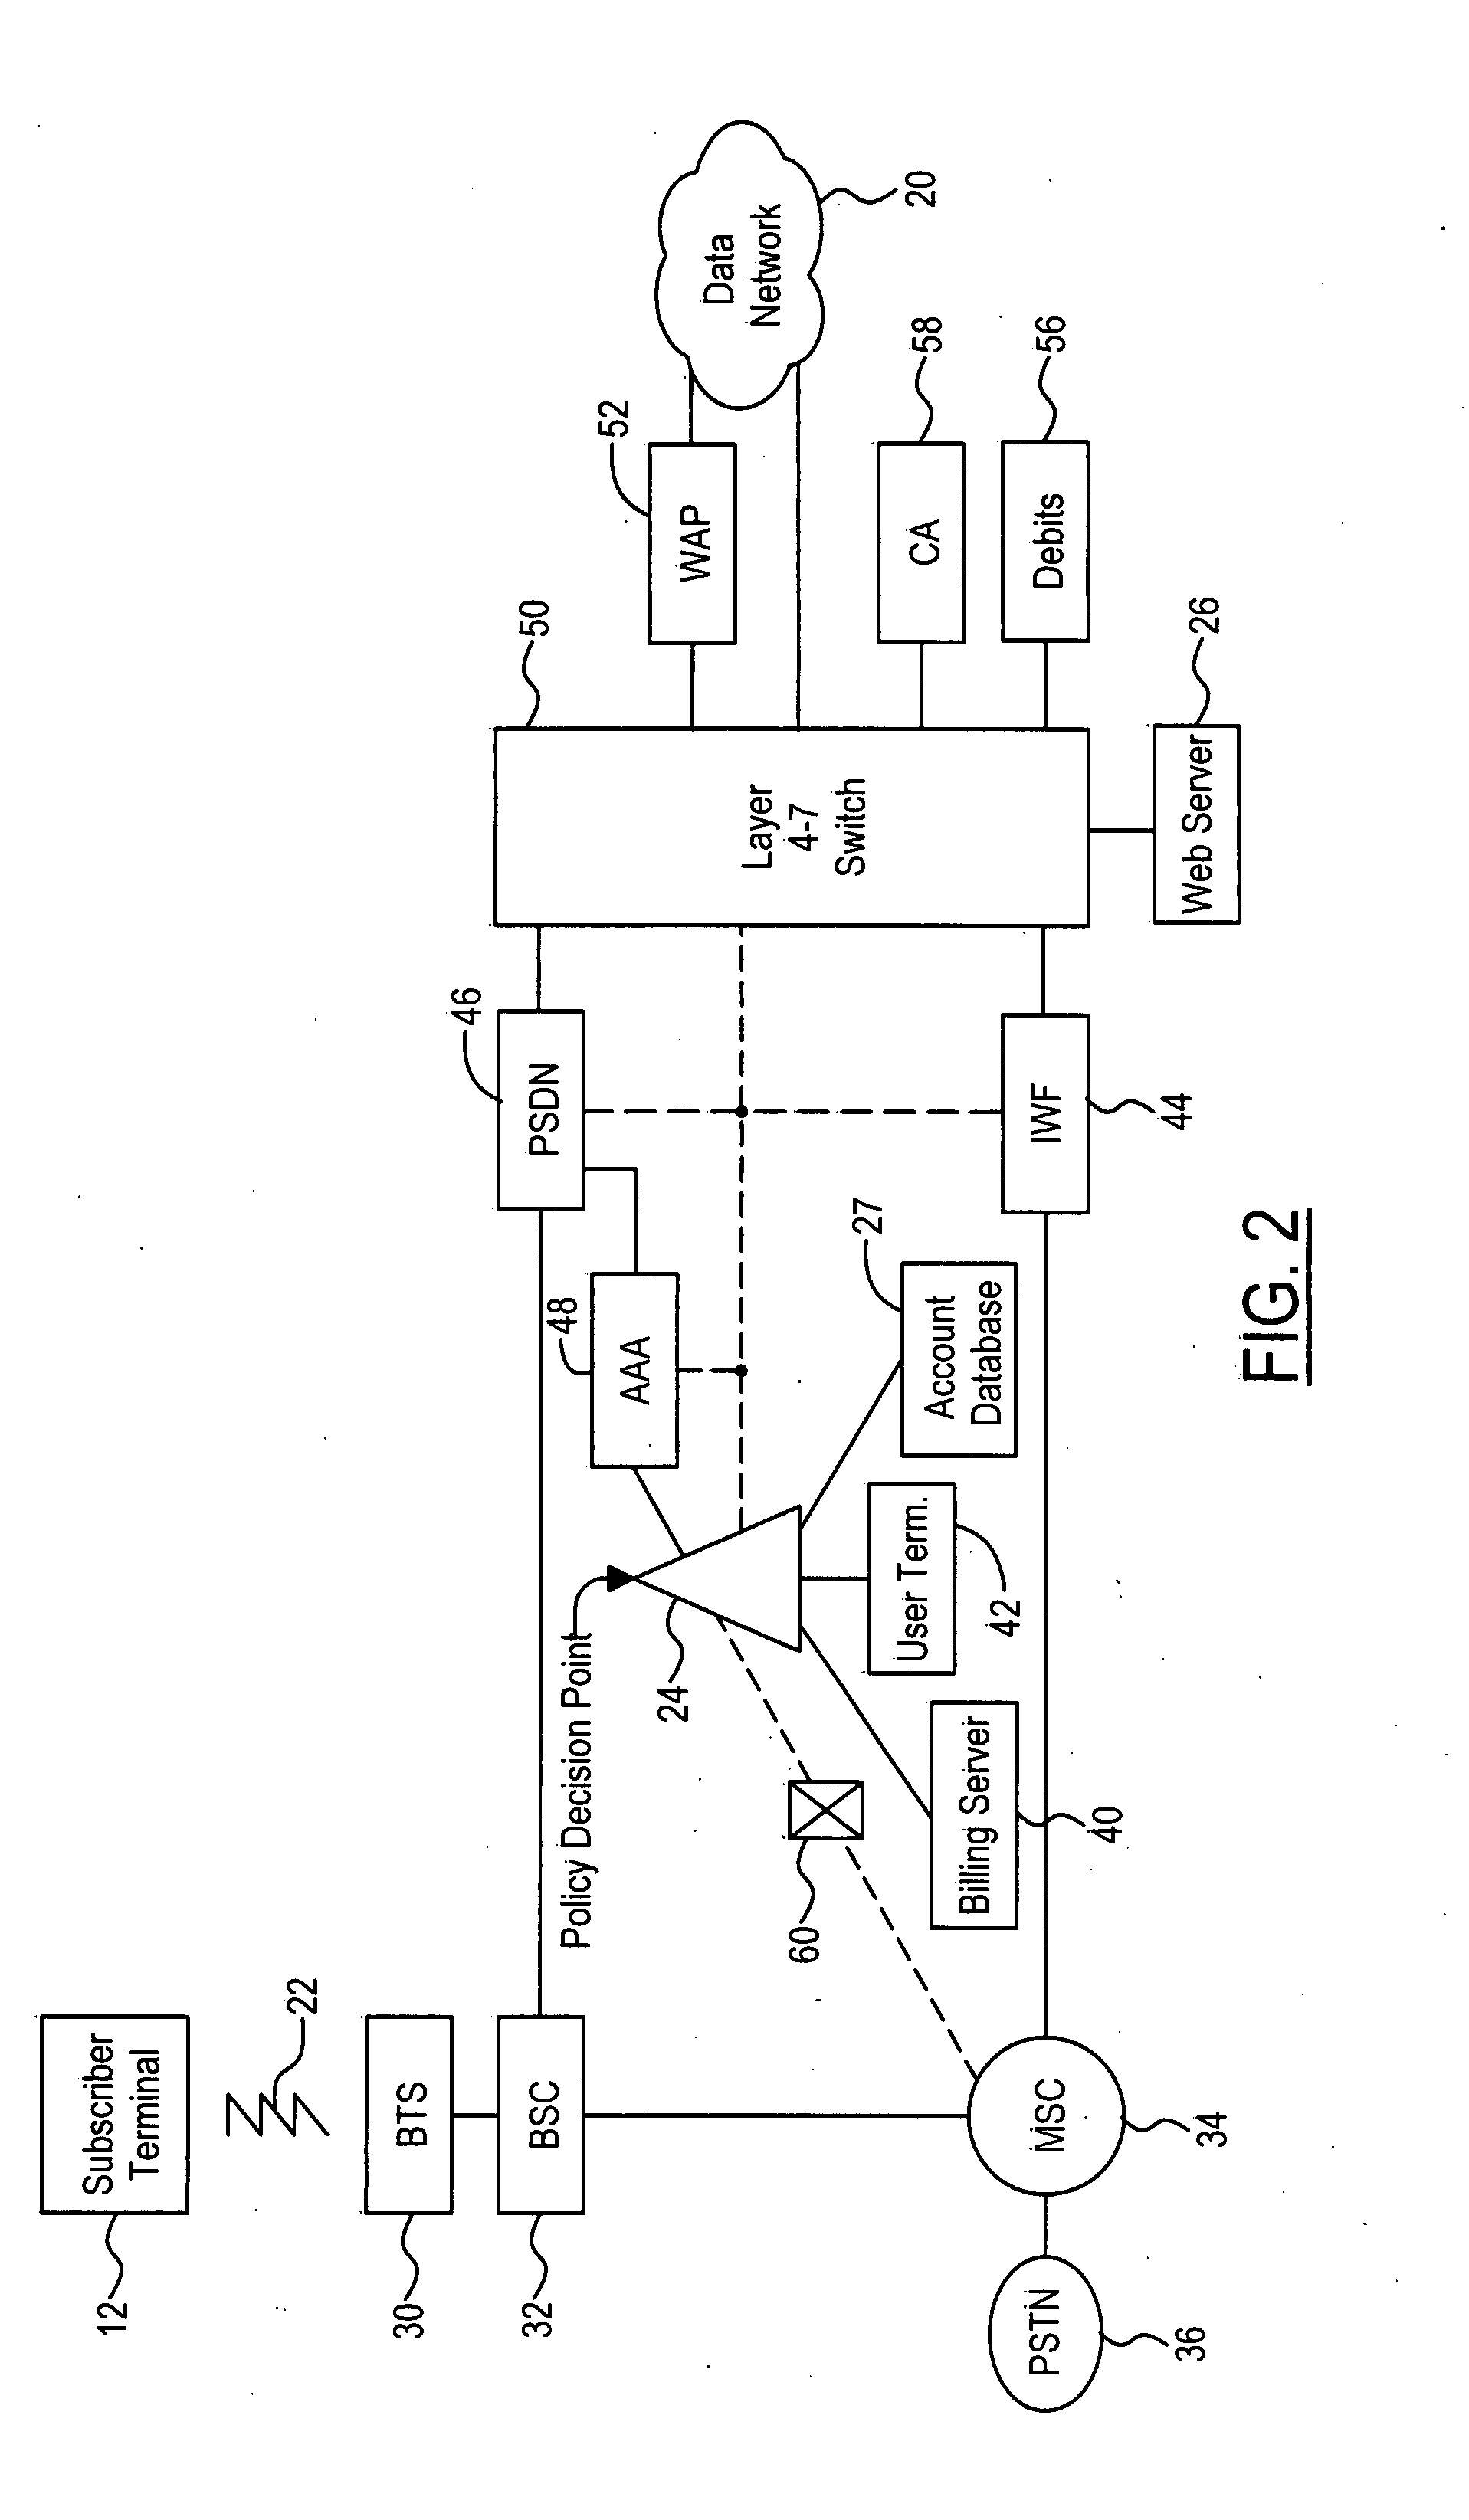 Method and system for providing prepaid data service